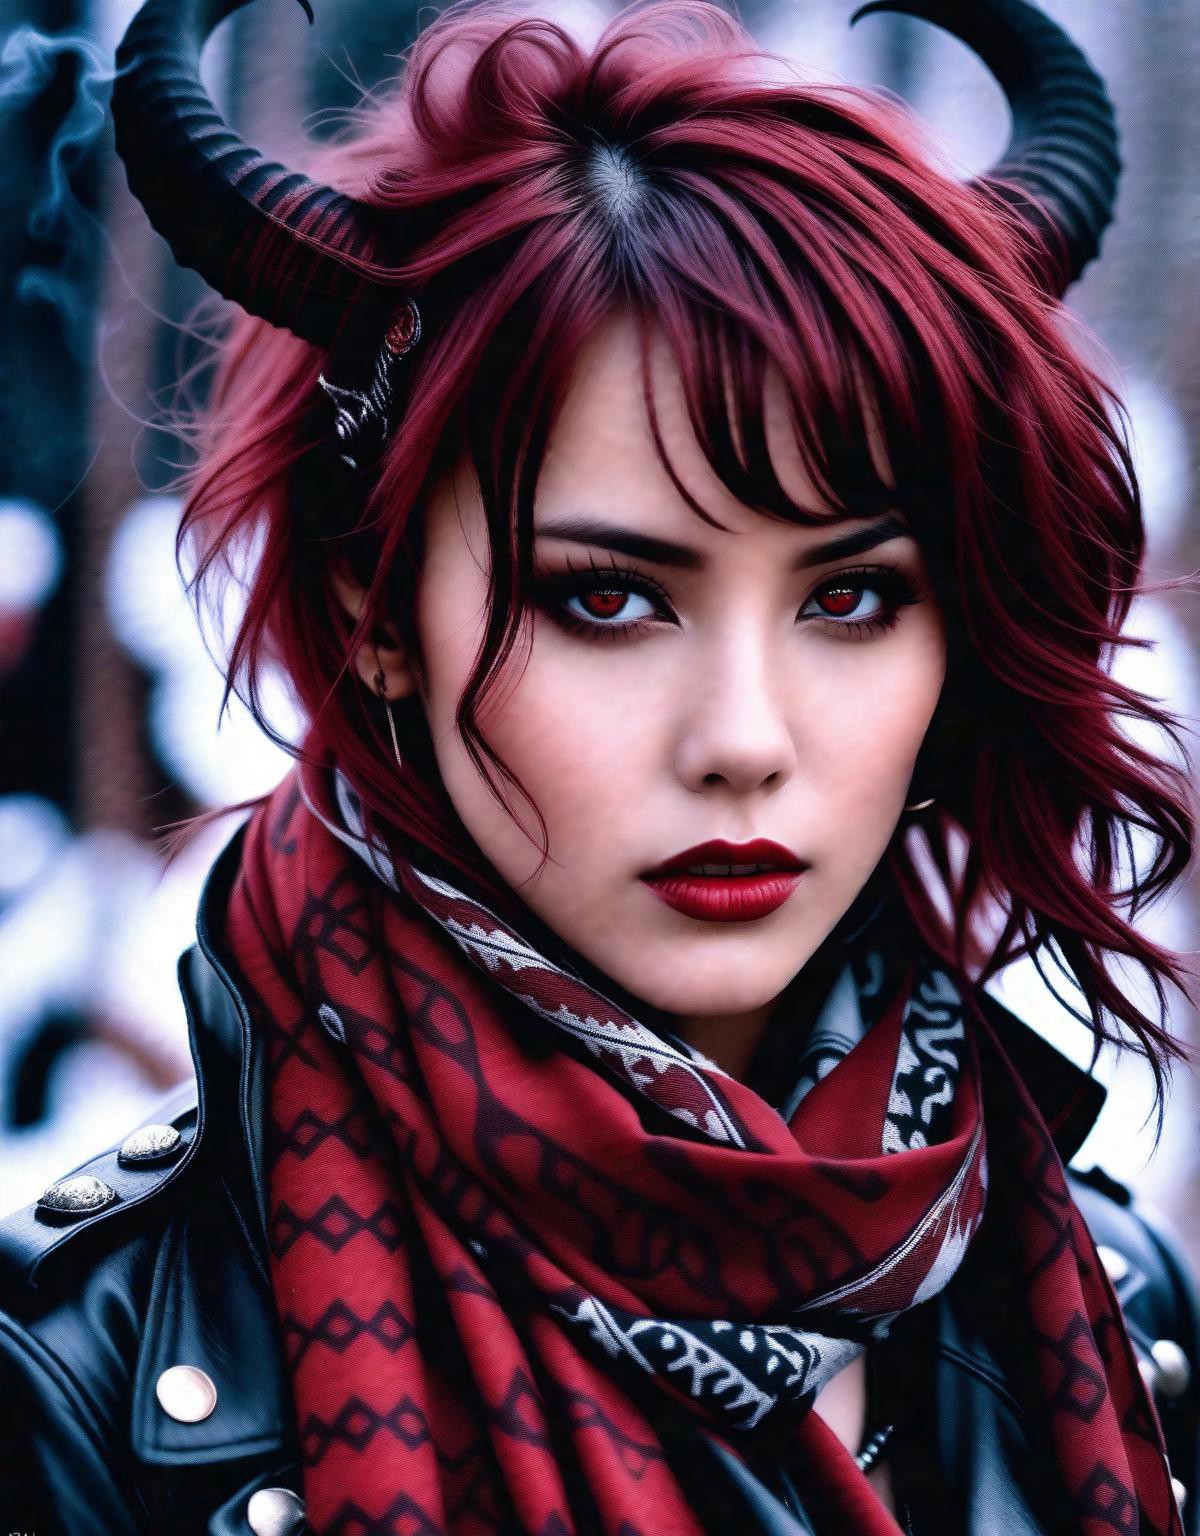 photograph, punk young_female_demon, red skin tone, (VAE batch), dark eyesLight hair styled as Wavy, Horns, Scarf, Lonely,...